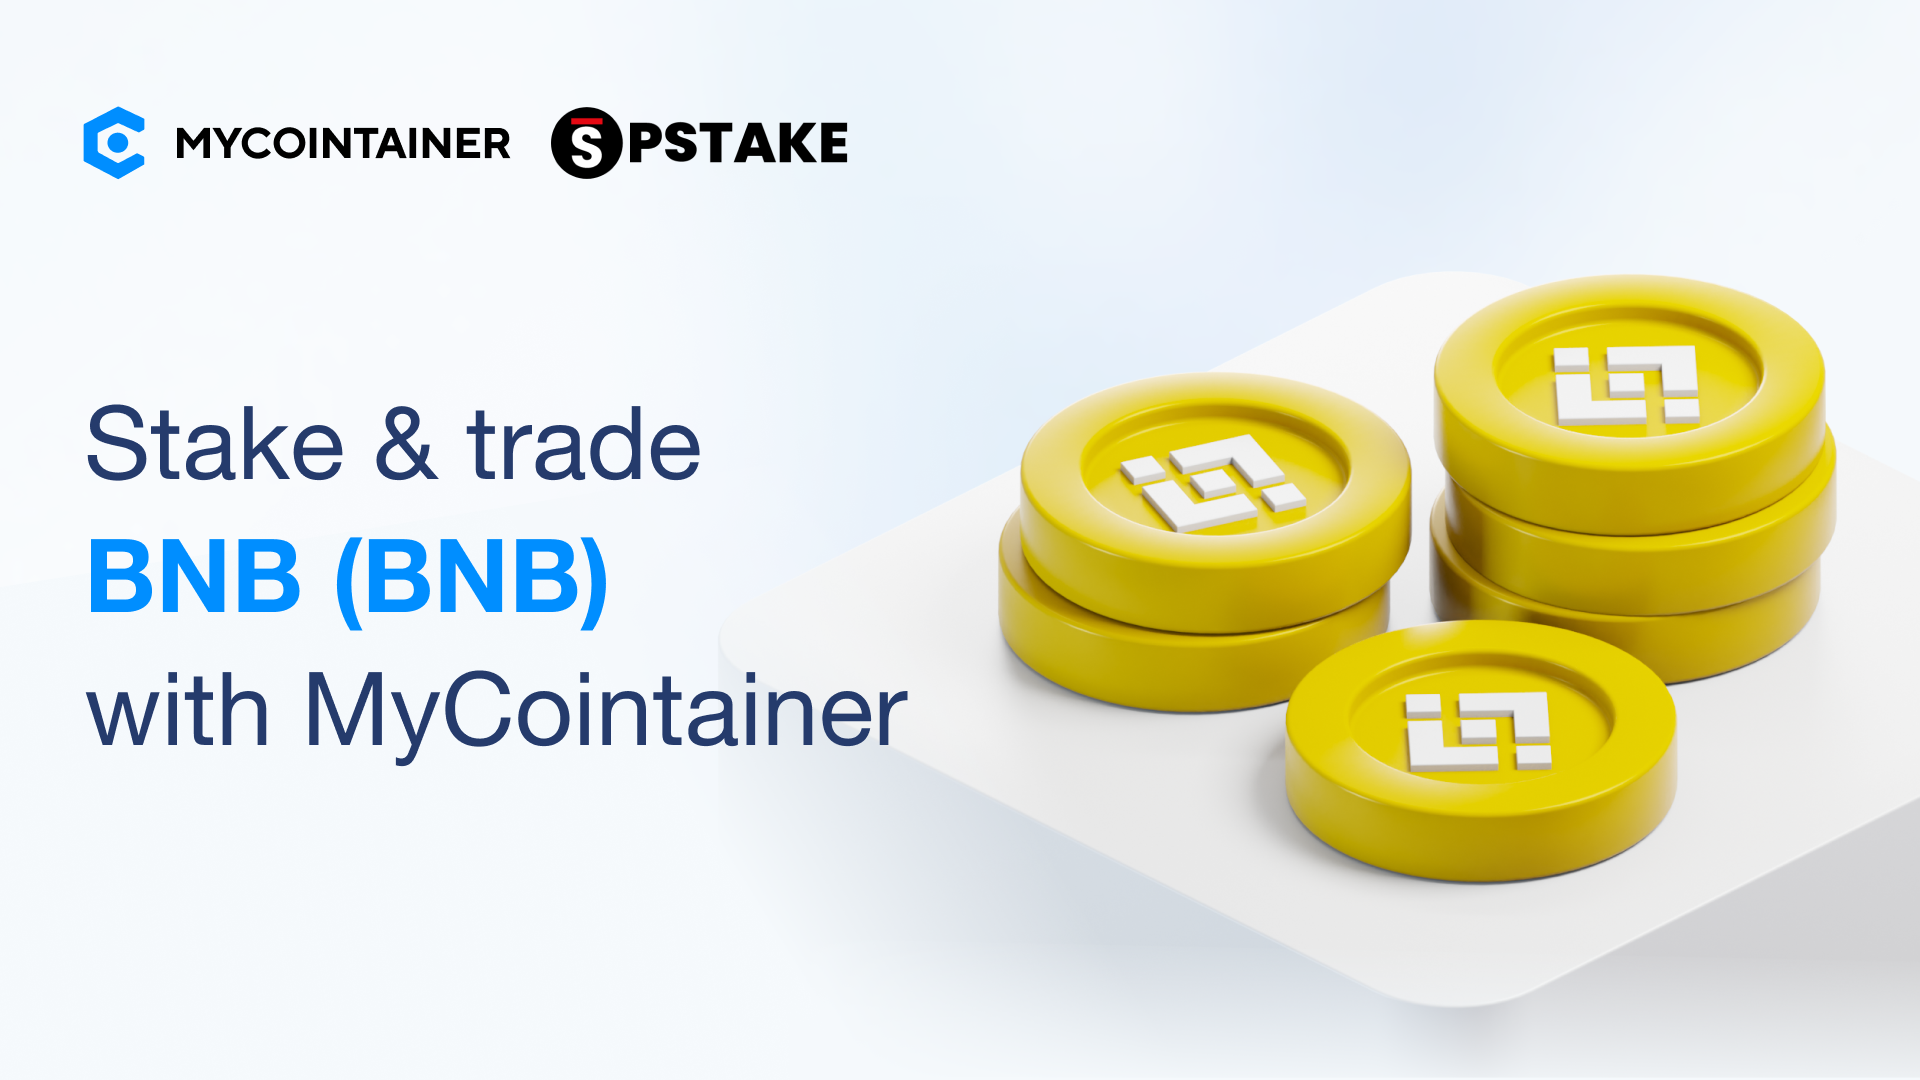 MyCointainer Partners with pSTAKE to Integrate BNB Staking